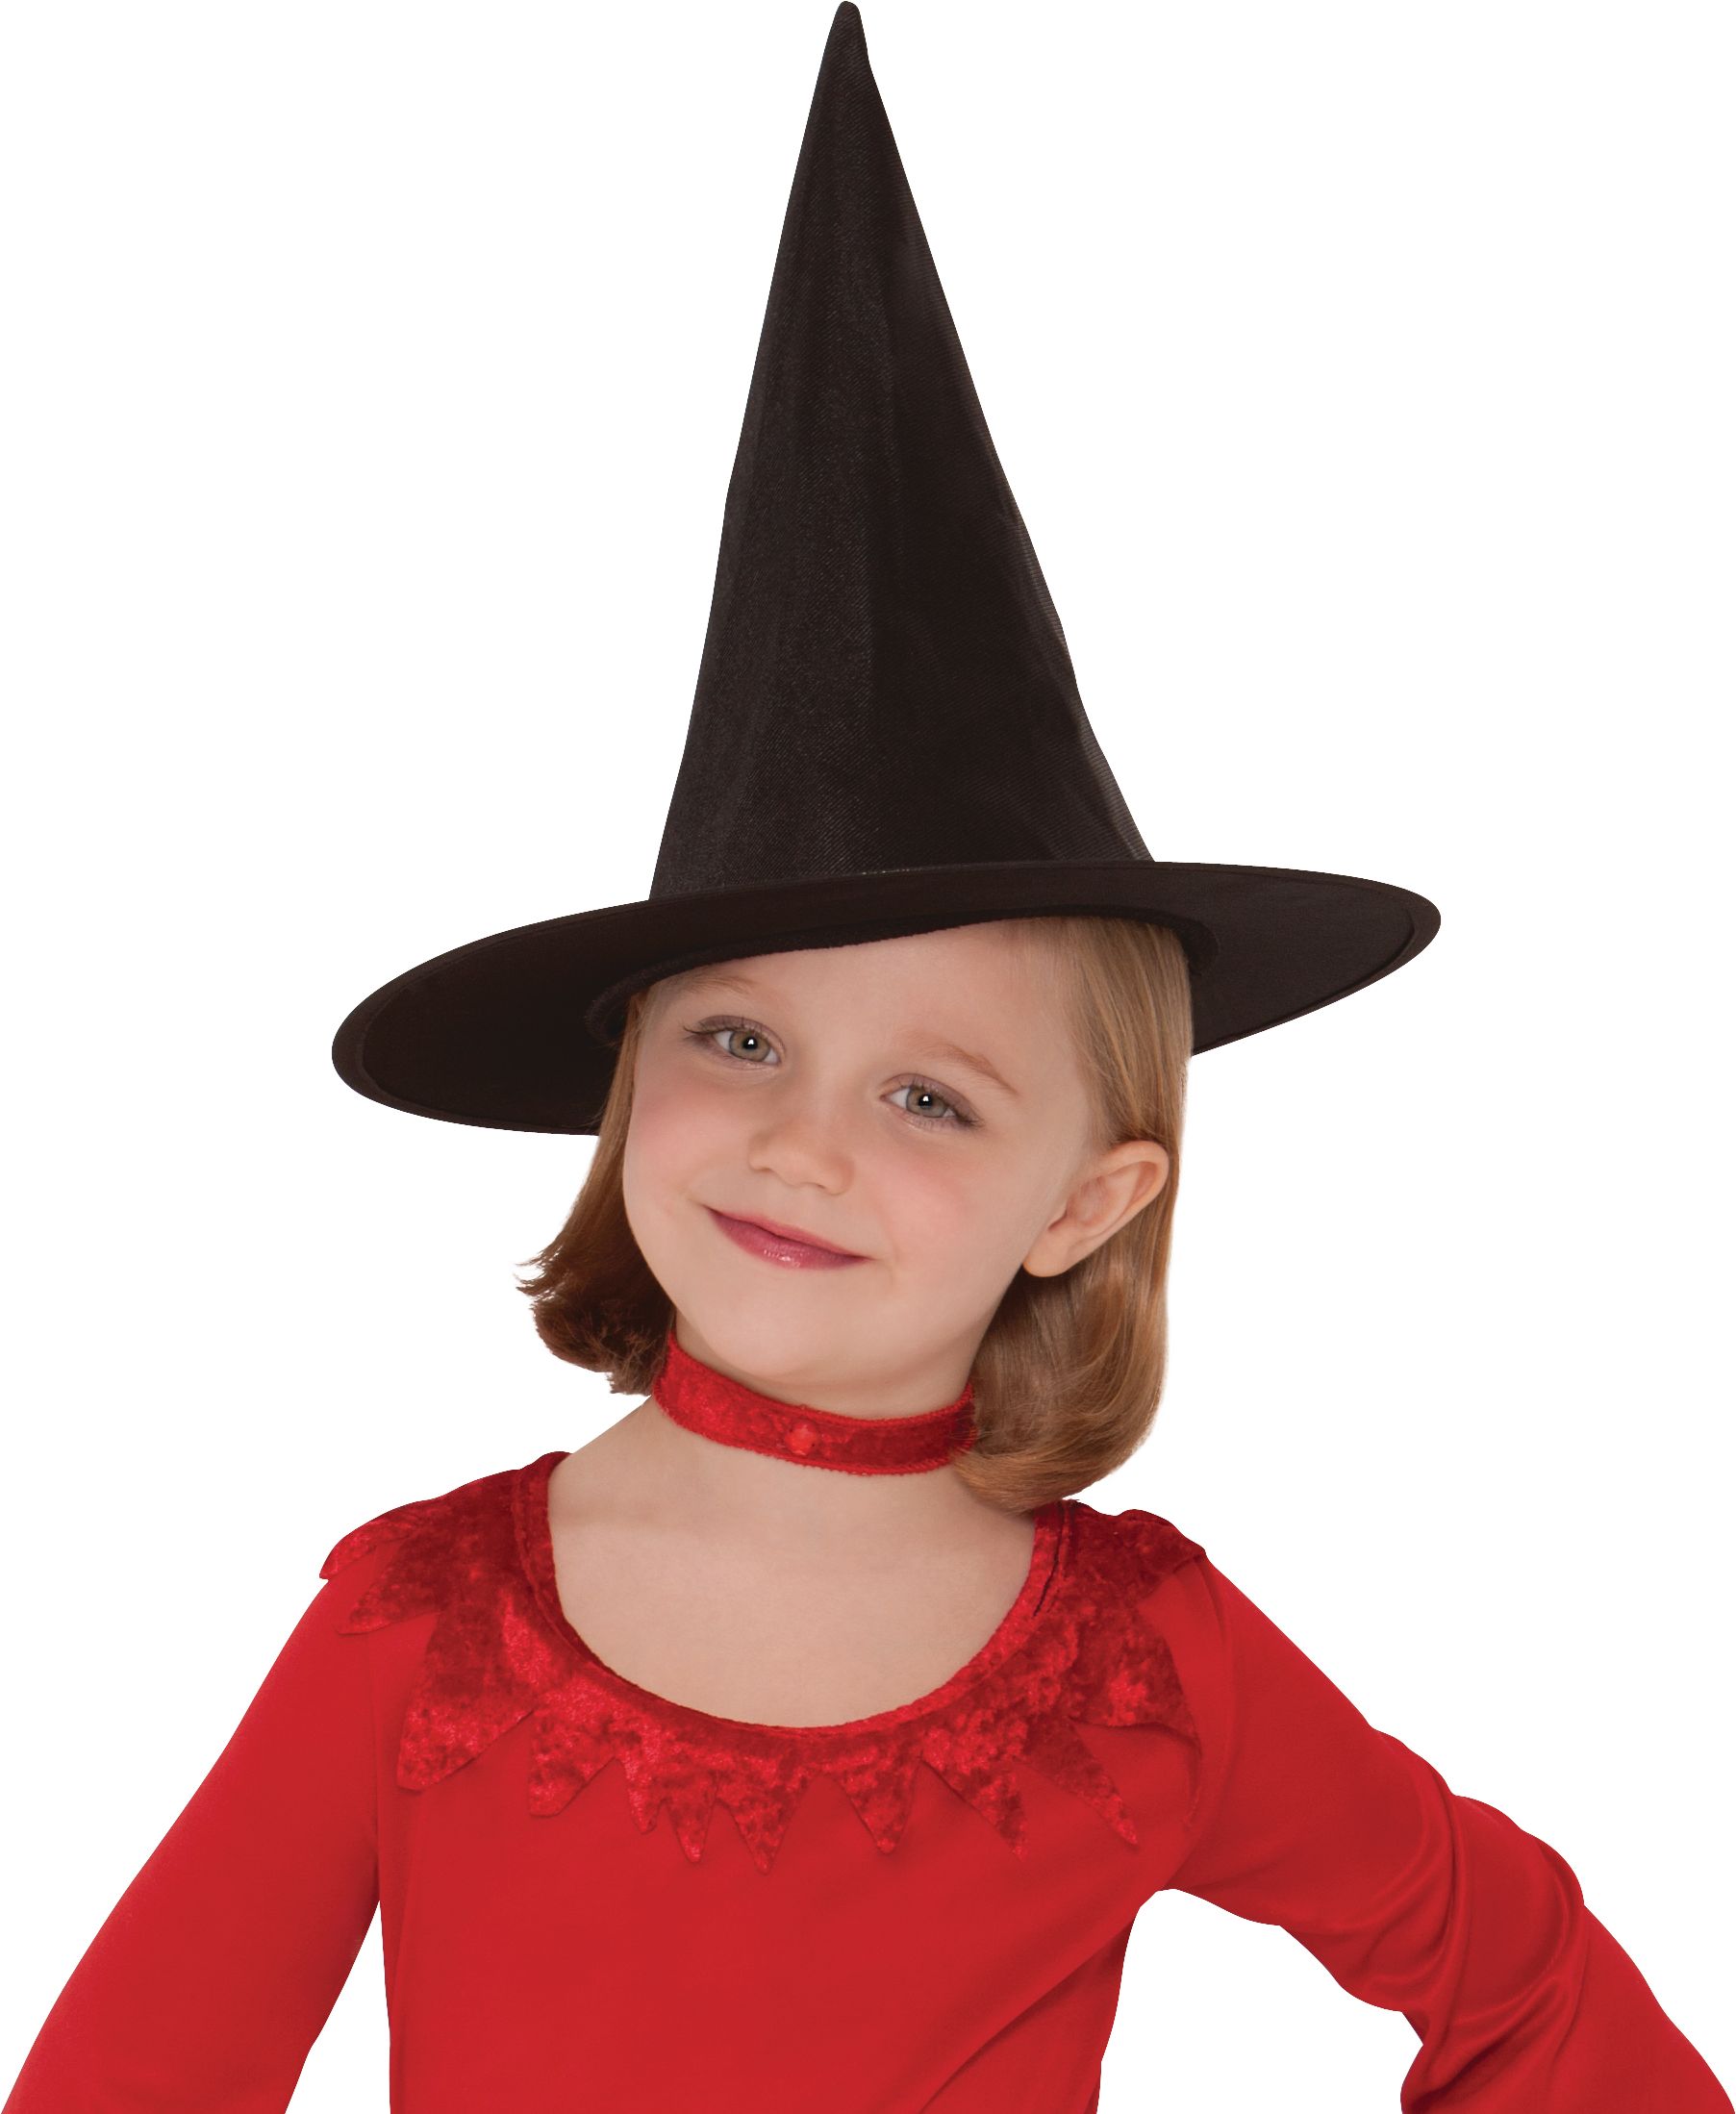 Kids' Witch Classic Pointy Hat, Black, One Size, Wearable Costume Accessory  for Halloween